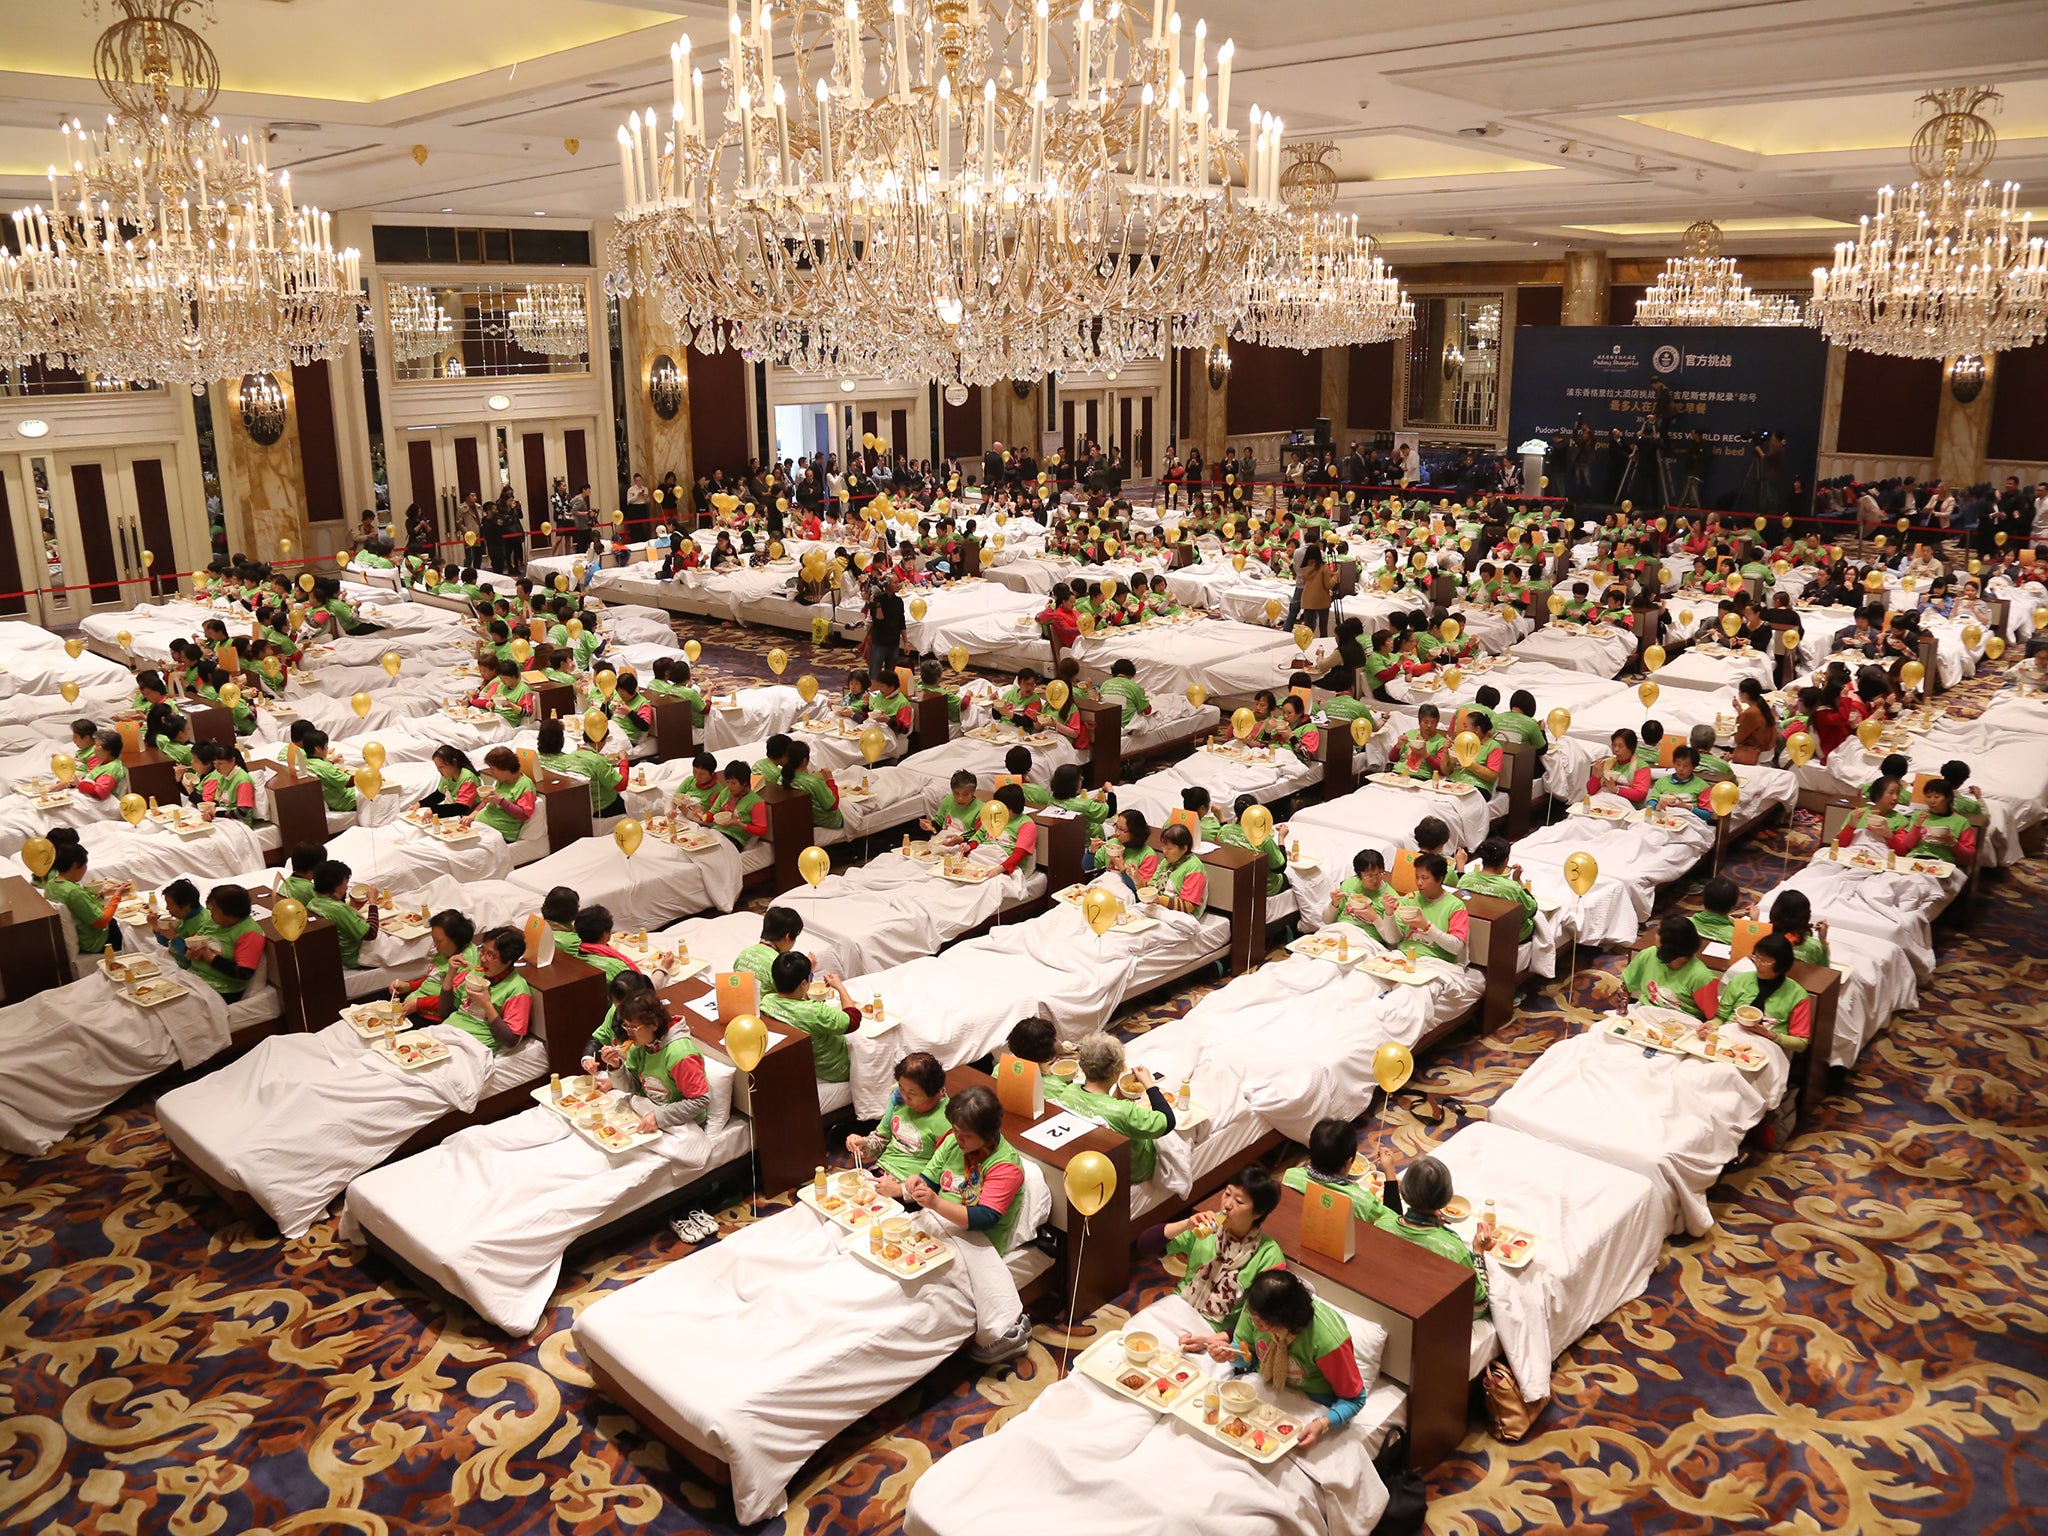 The most people eating breakfast in bed is 388 and was achieved by Pudong Shangri-La, East Shanghai (China) in Shanghai, China